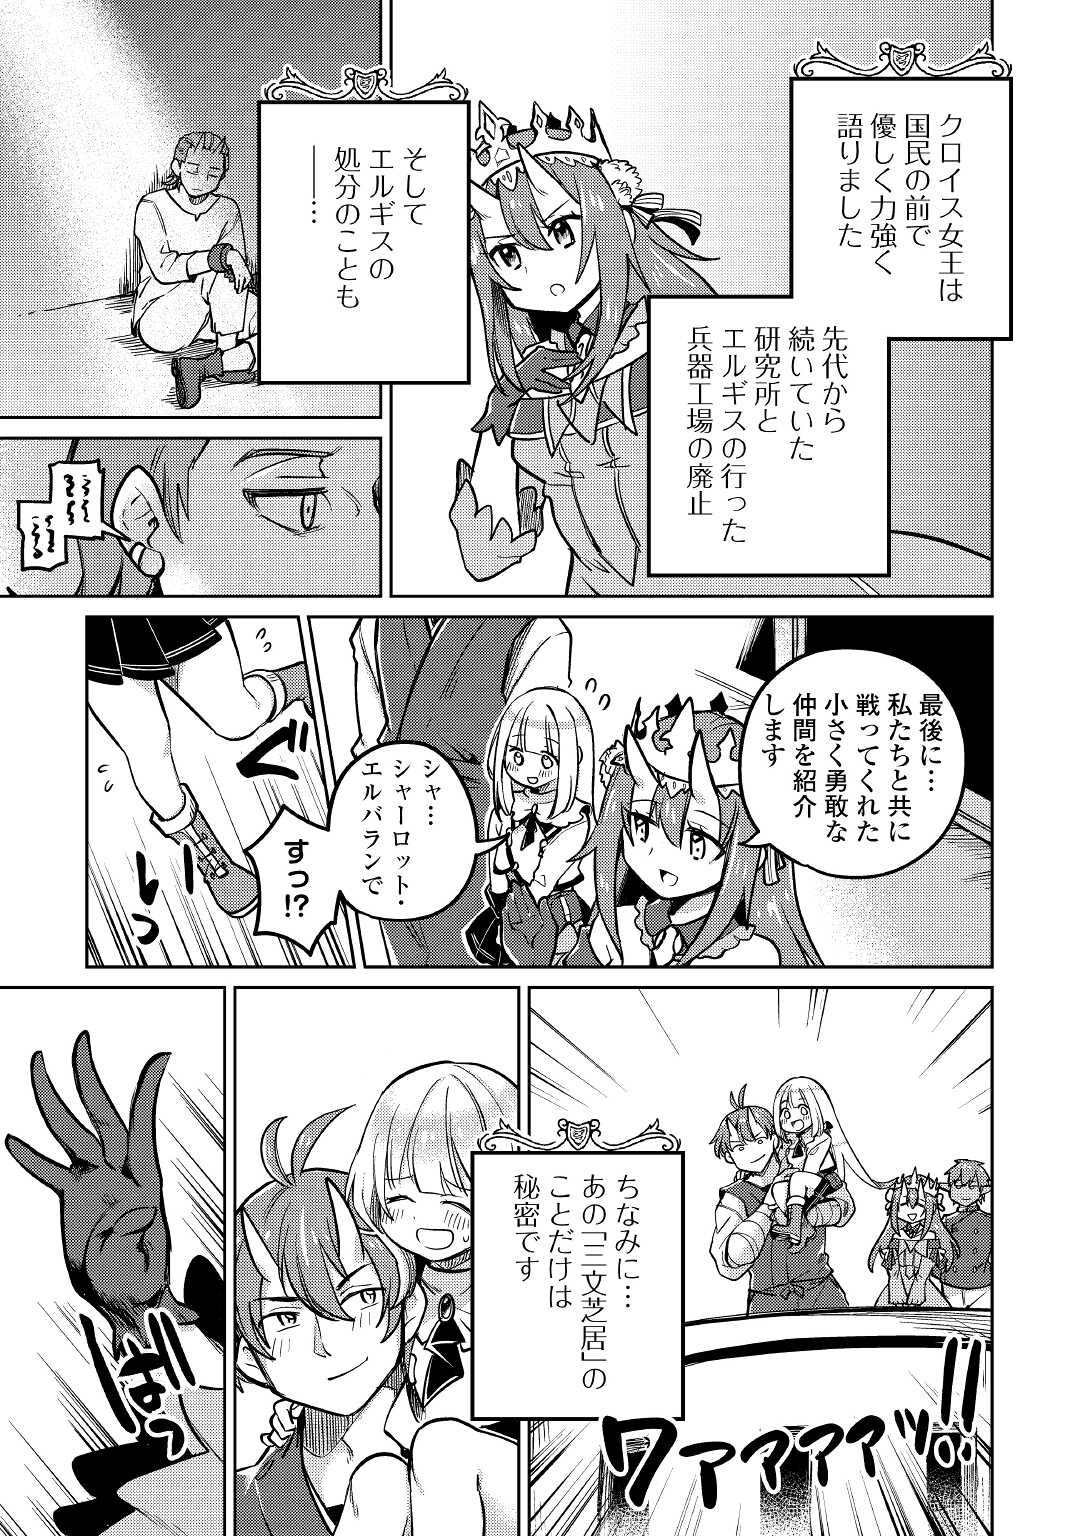 The Former Structural Researcher’s Story of Otherworldly Adventure 第40話 - Page 27